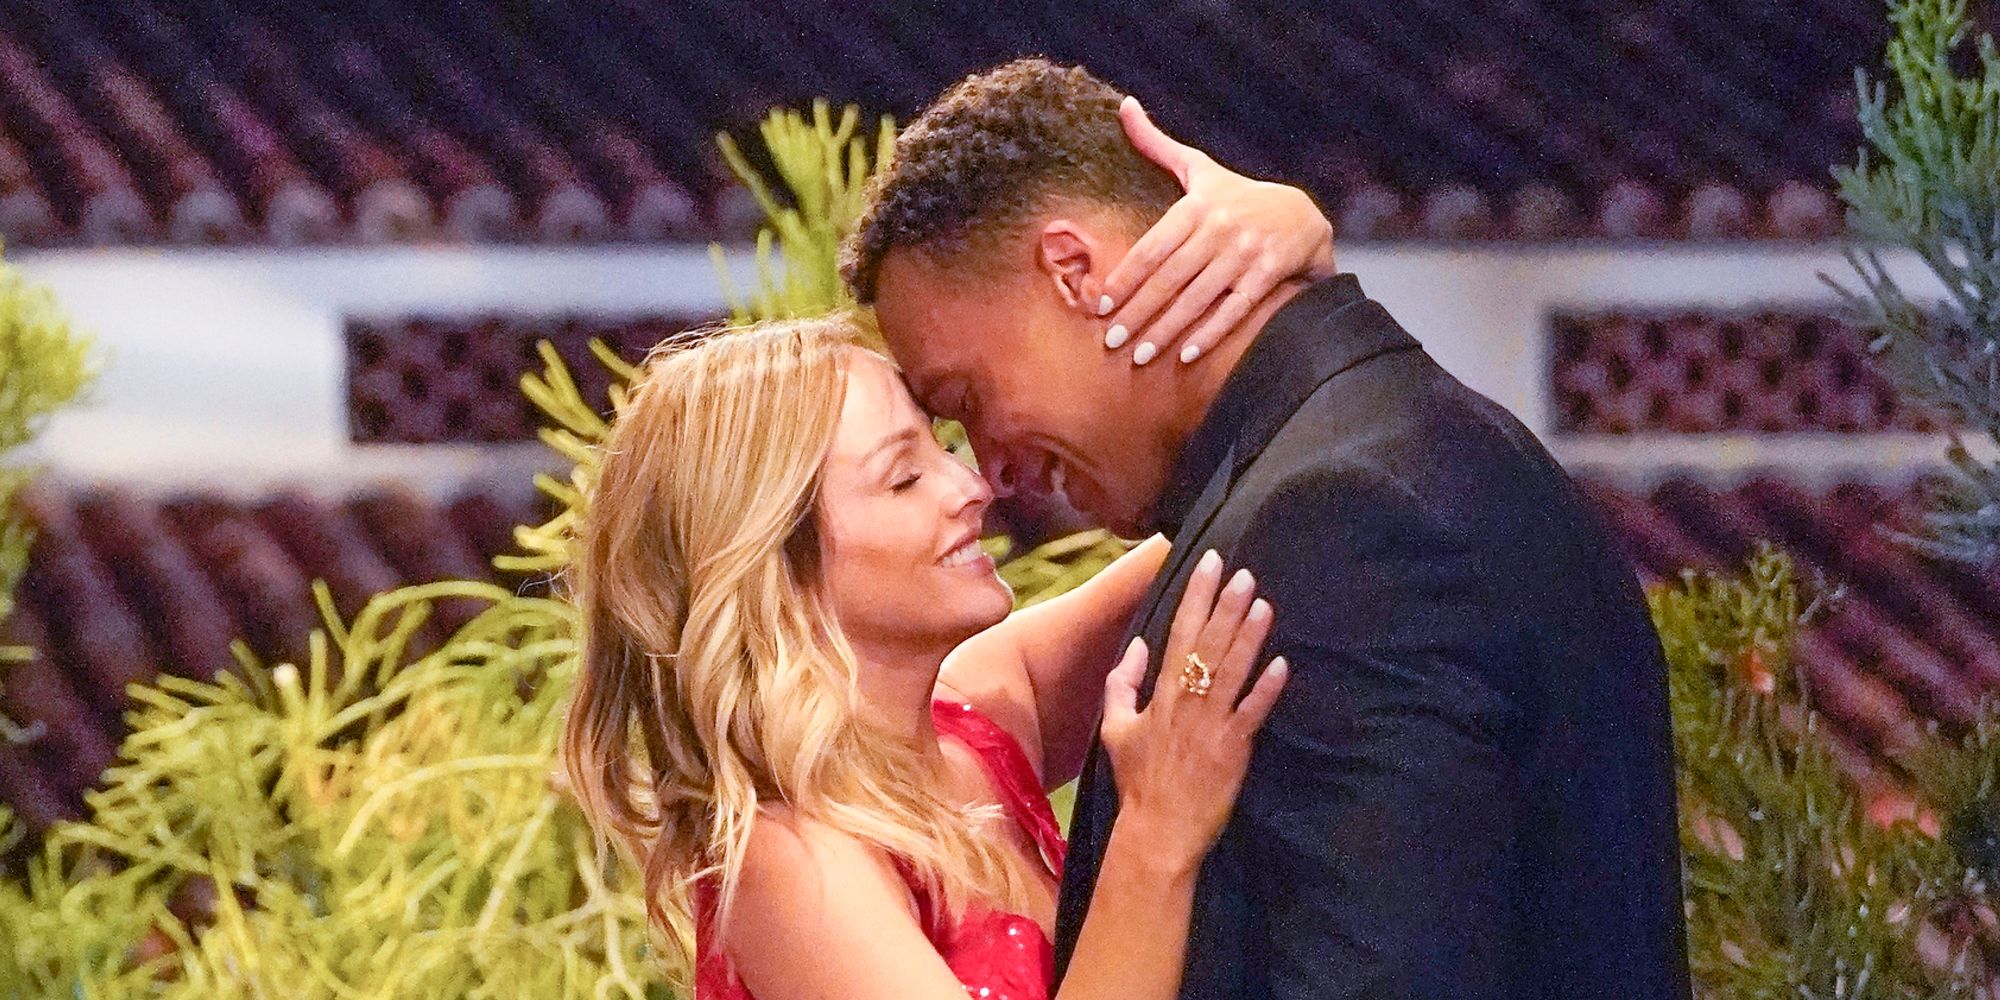 Clare Crawley and Dale Moss on The Bachelorette season 16 smiling